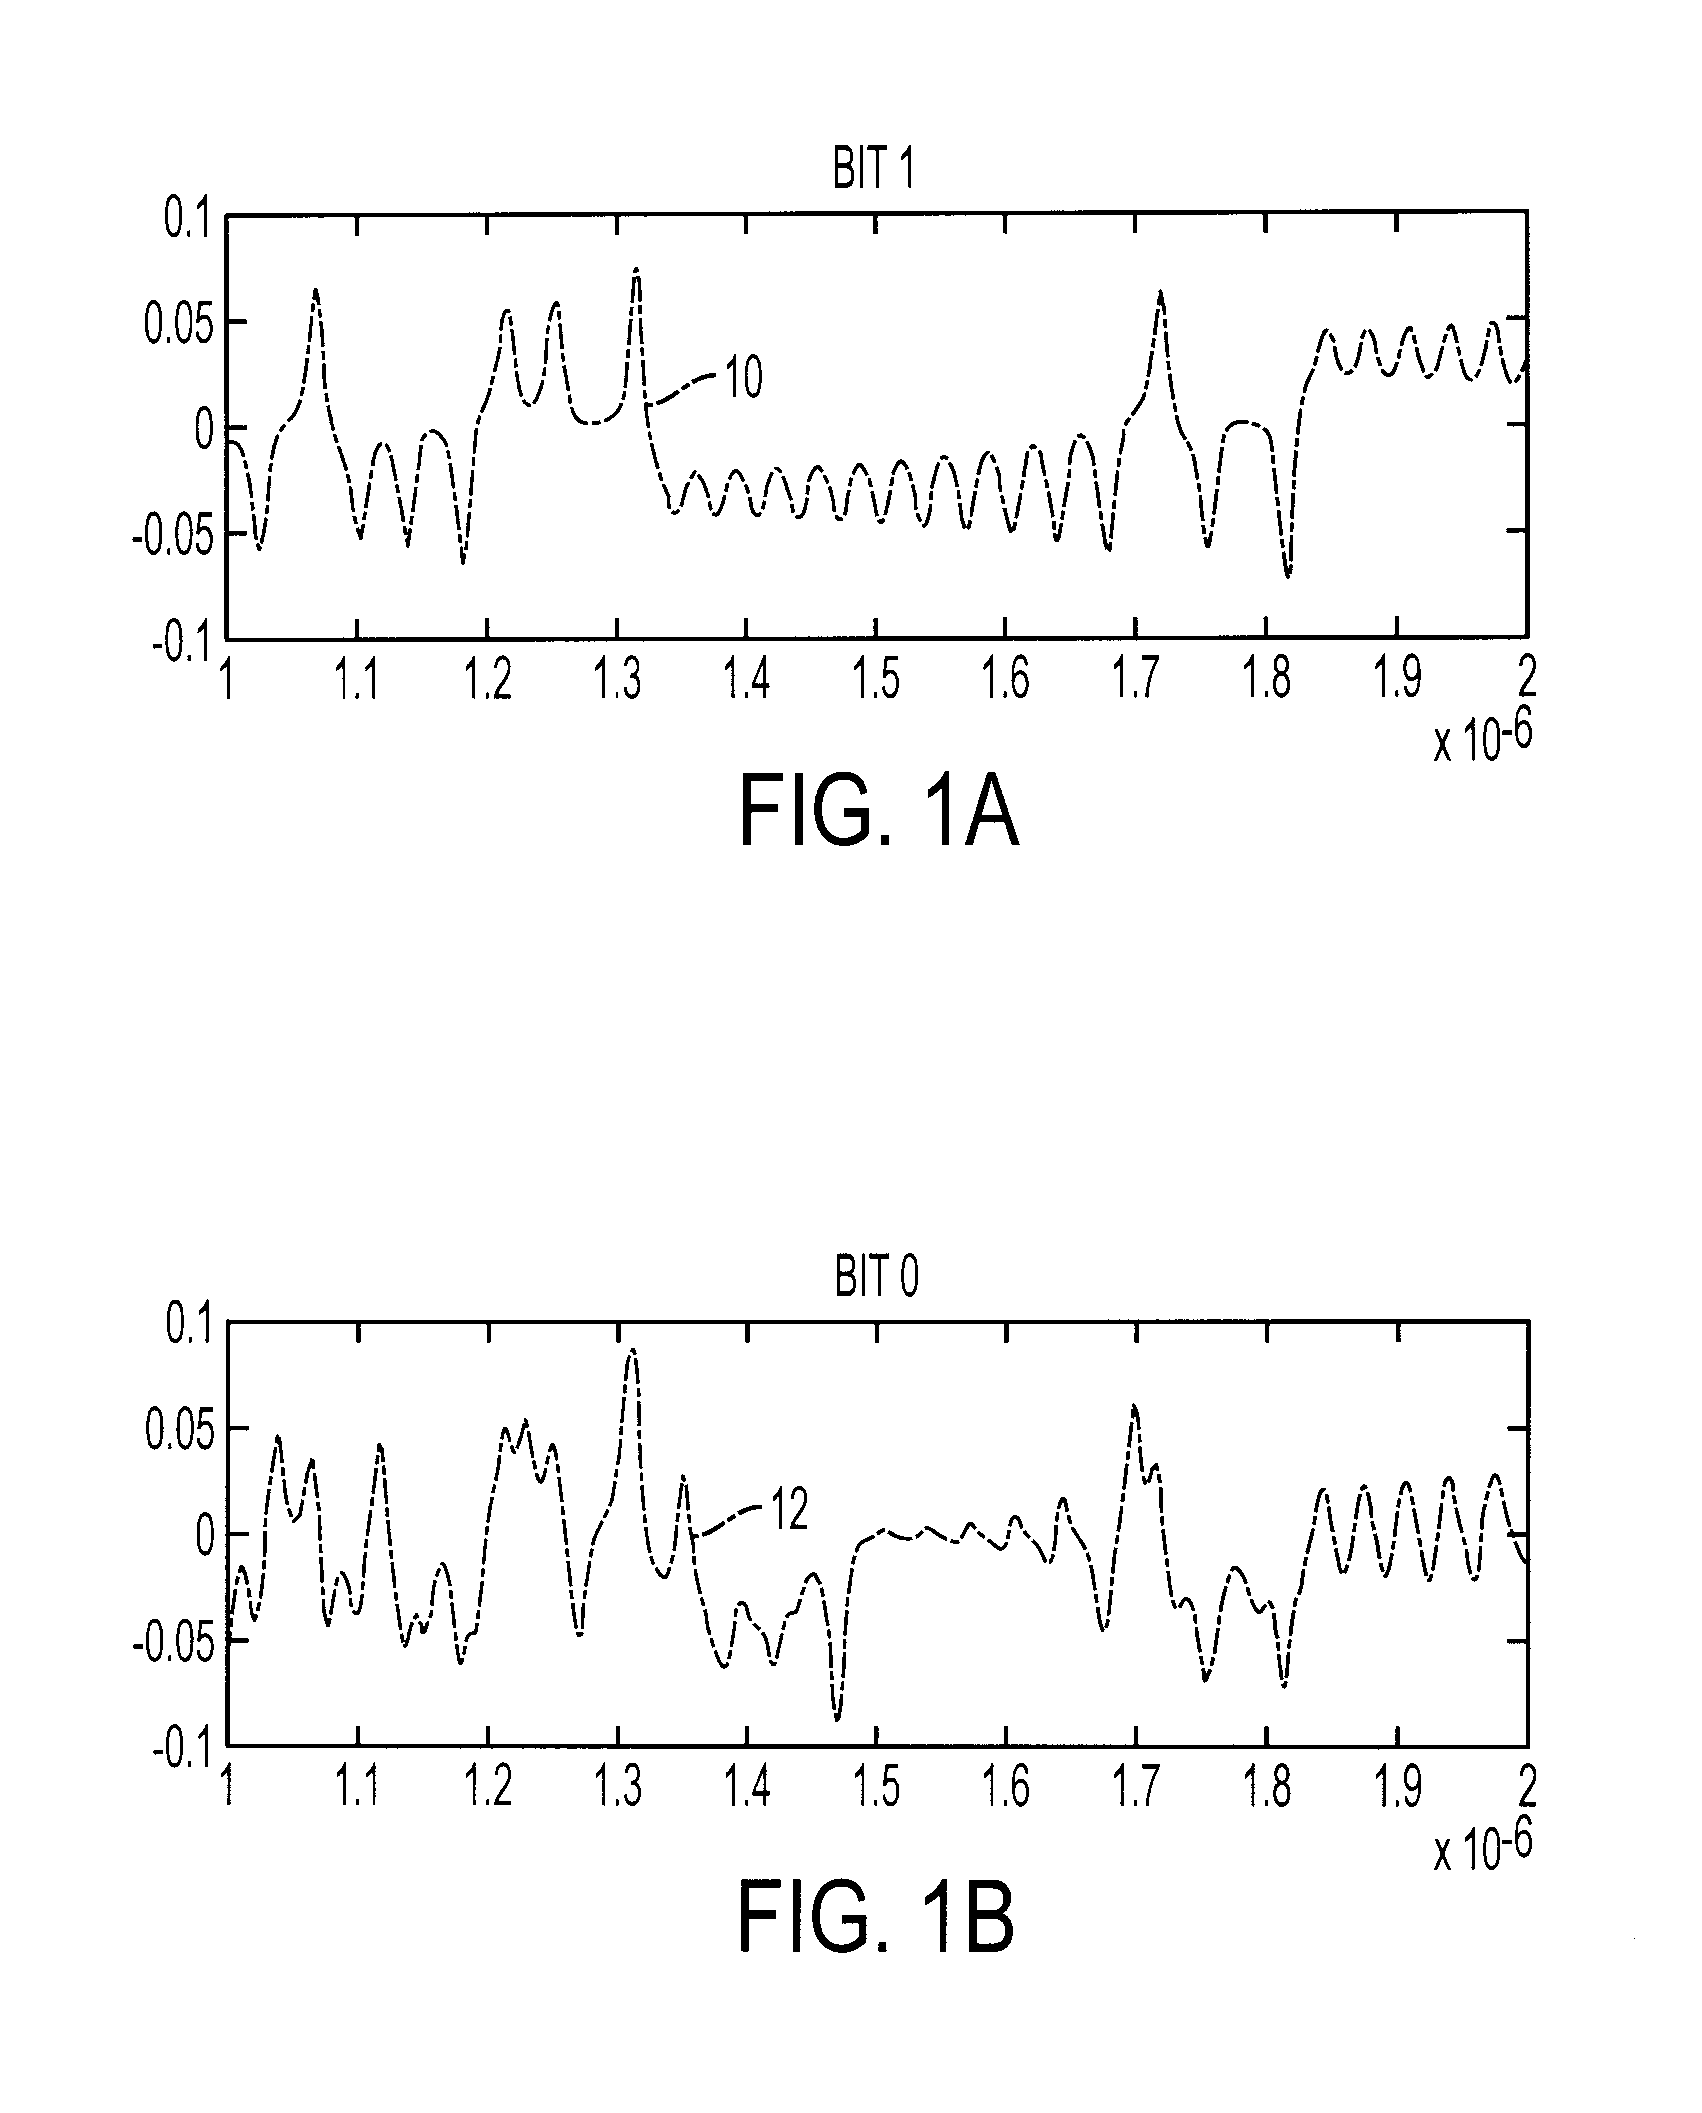 Method and Apparatus for Secure Digital Communications Using Chaotic Signals